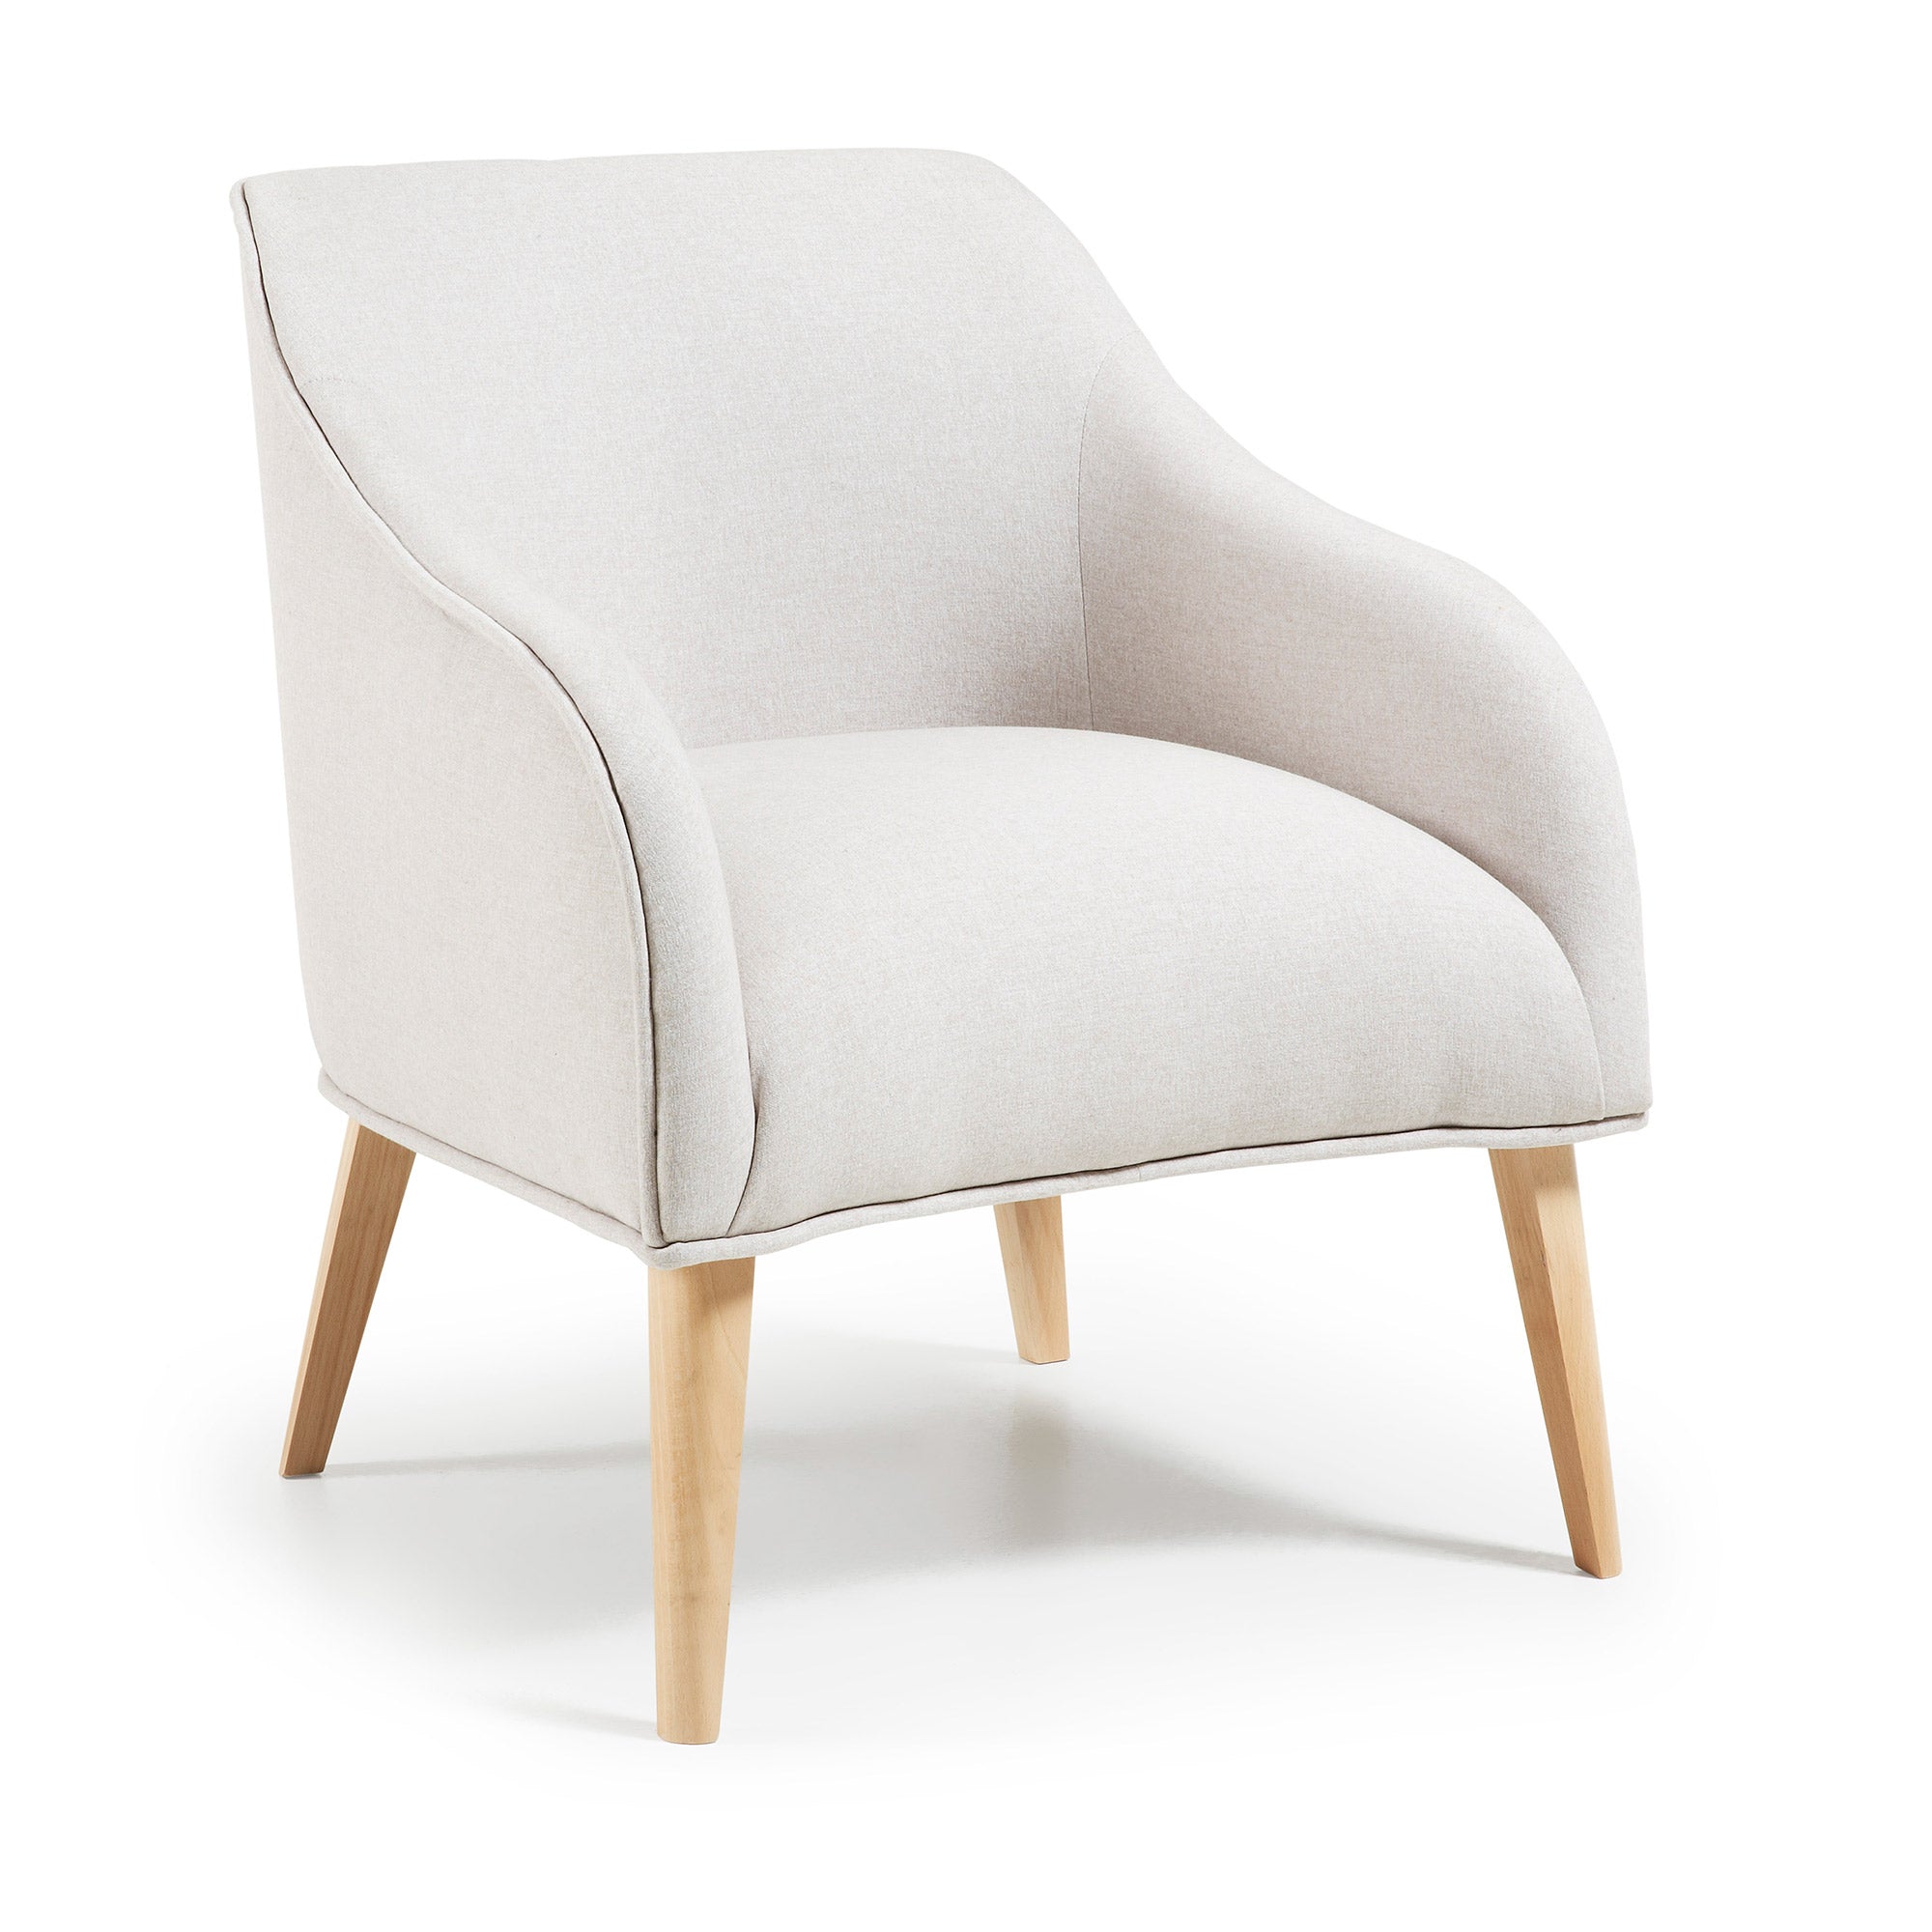 Bobly armchair in beige with wooden legs with natural finish